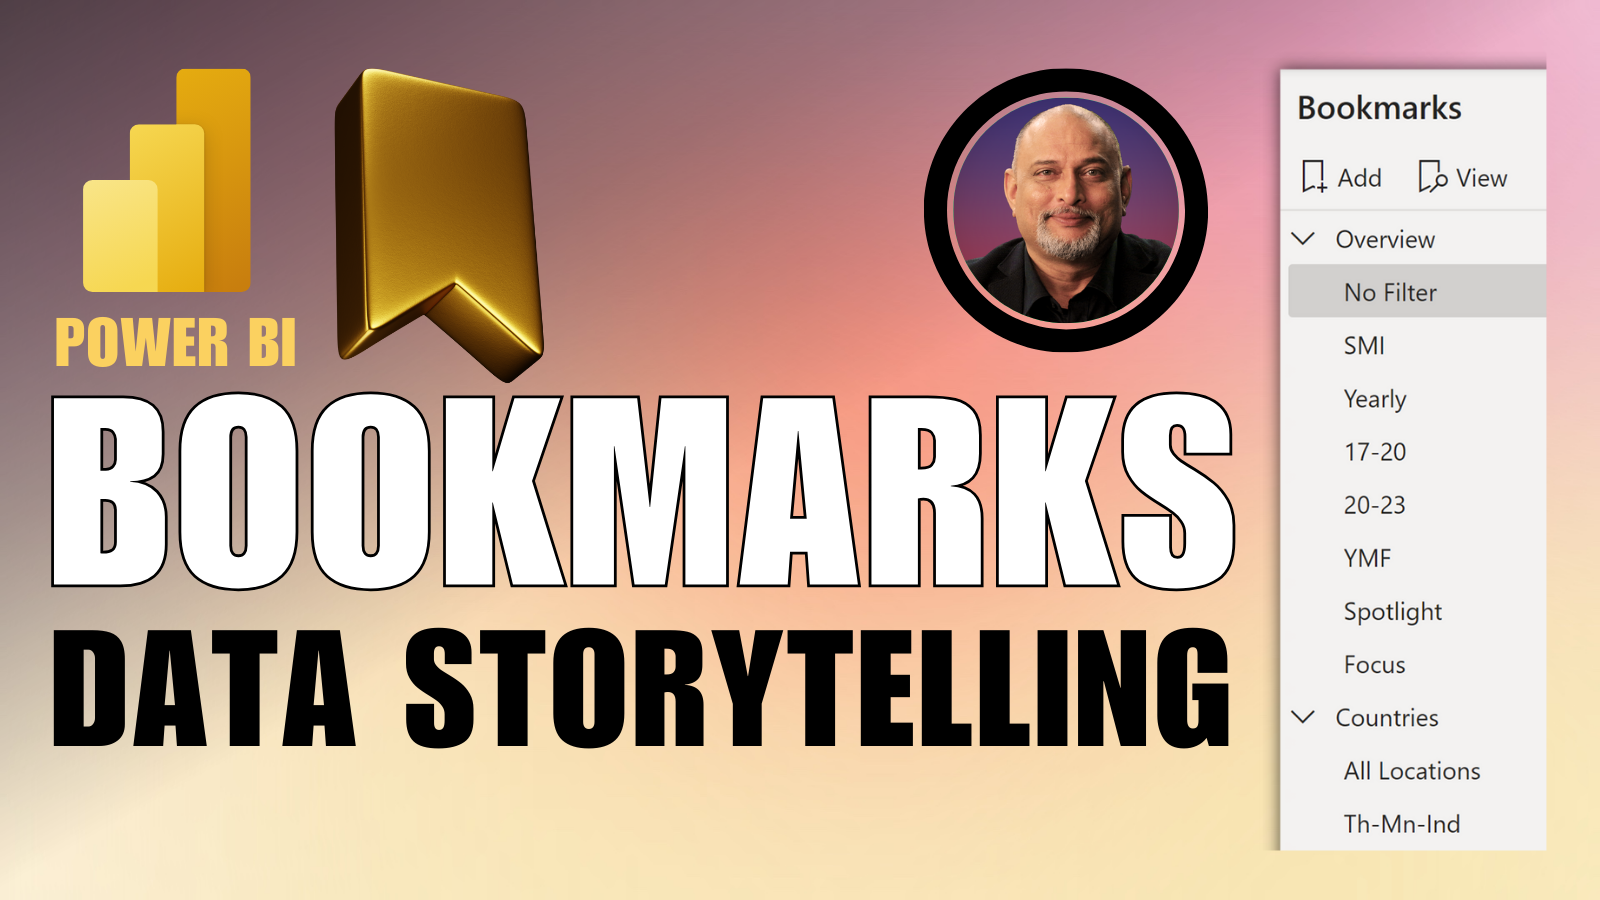 How to use Power BI Bookmarks for data storytelling